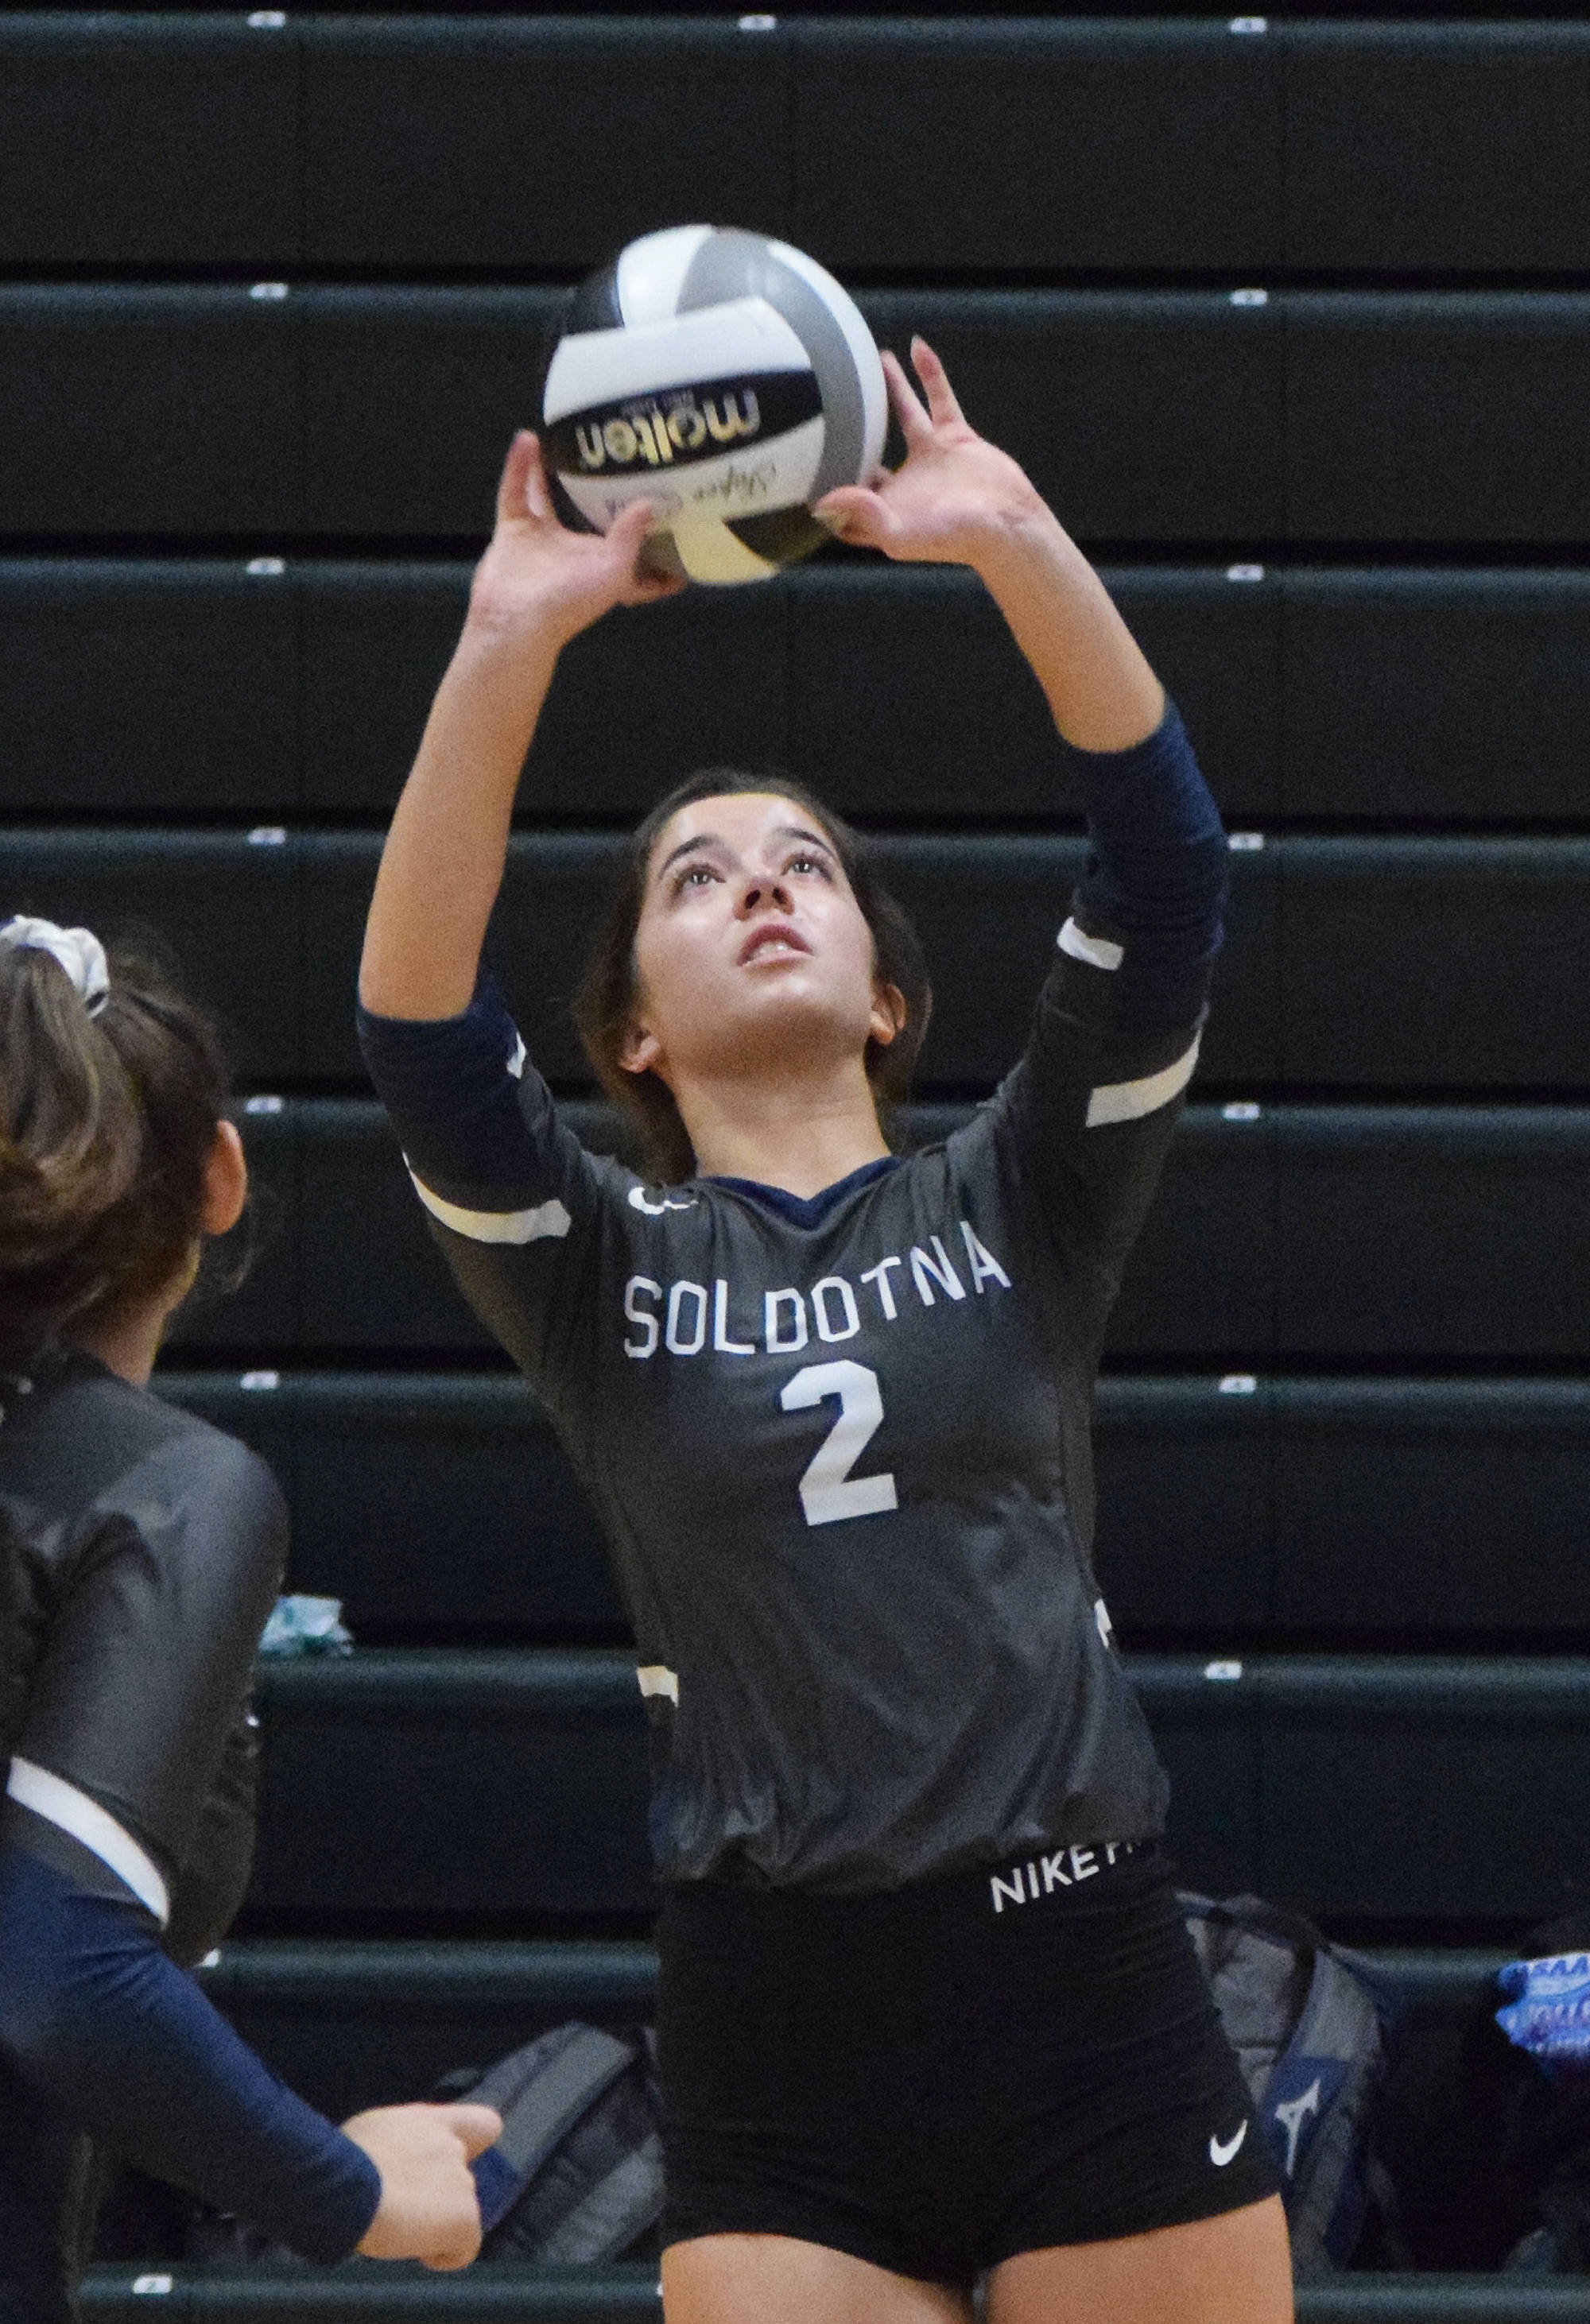 Soldotna junior Sierra Kuntz sets up a shot against Bartlett, Friday, Nov. 15, 2019, at the Class 4A state volleyball tournament at the Alaska Airlines Center in Anchorage, Alaska. (Photo by Joey Klecka/Peninsula Clarion)